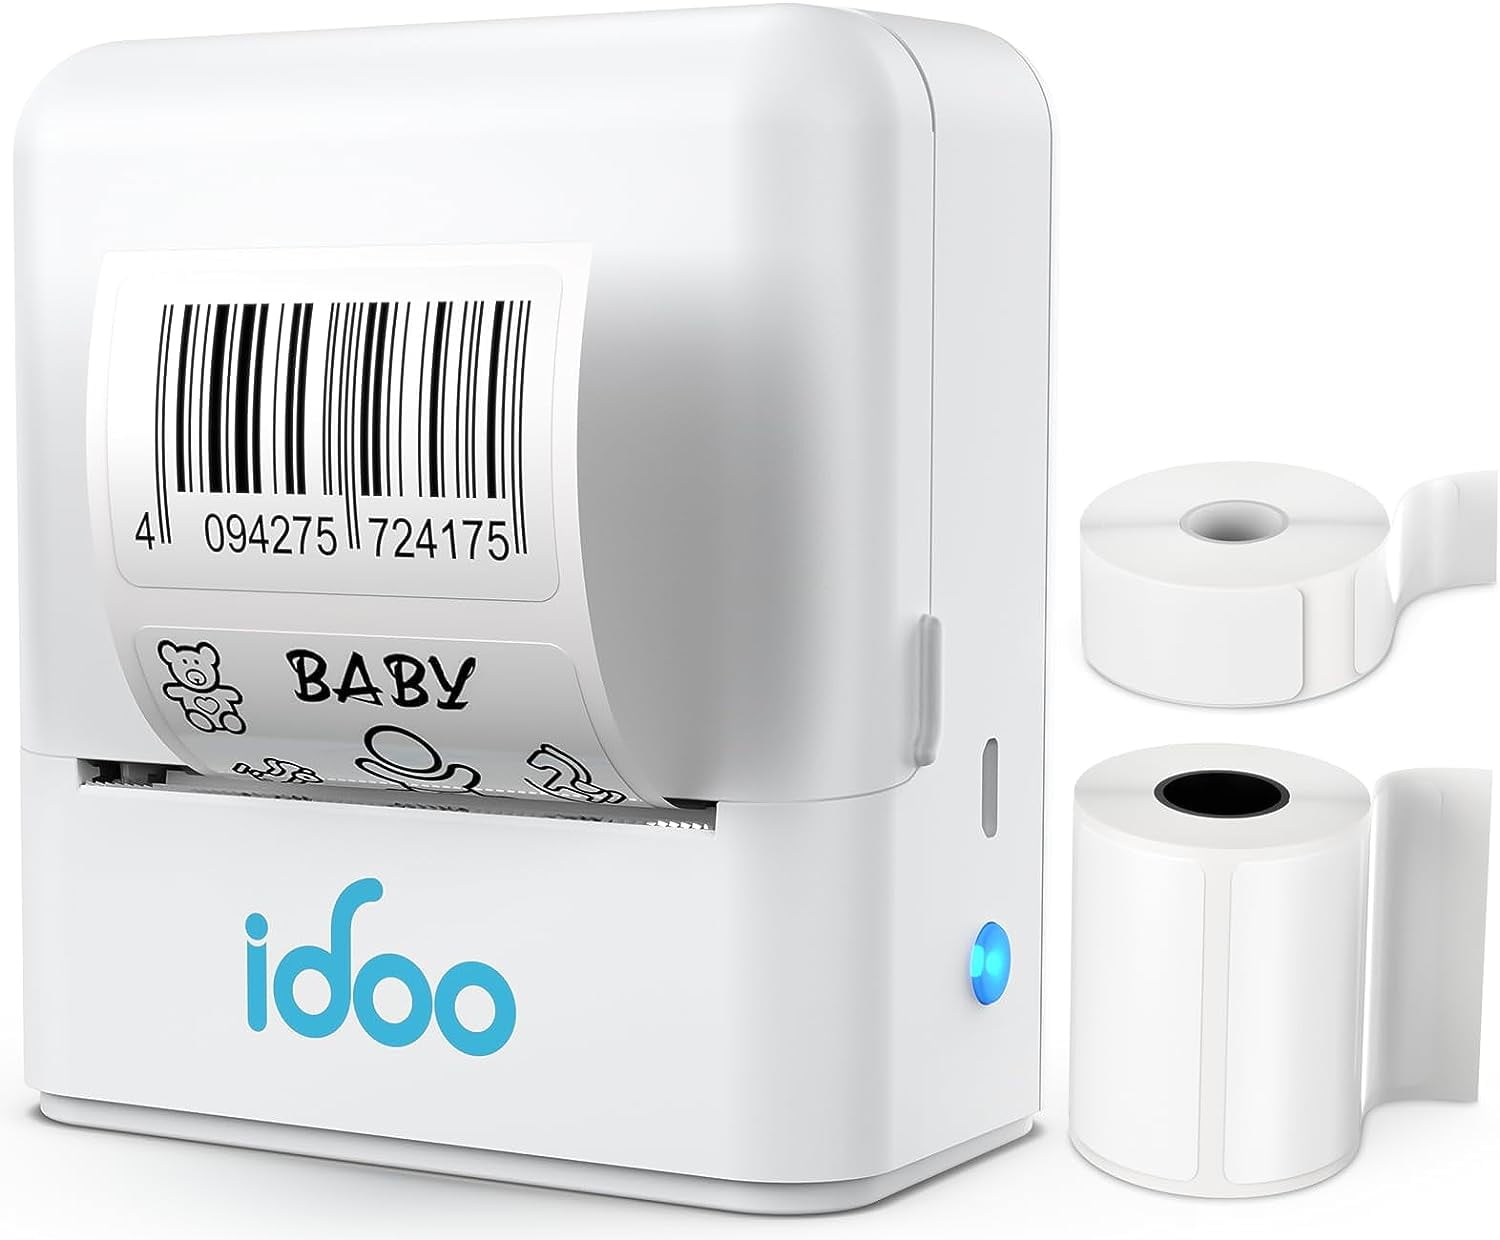 iDOO Smart Thermal Label Printer, Portable, Inkless, Rechargeable, for  Organizing Storage Office Home 